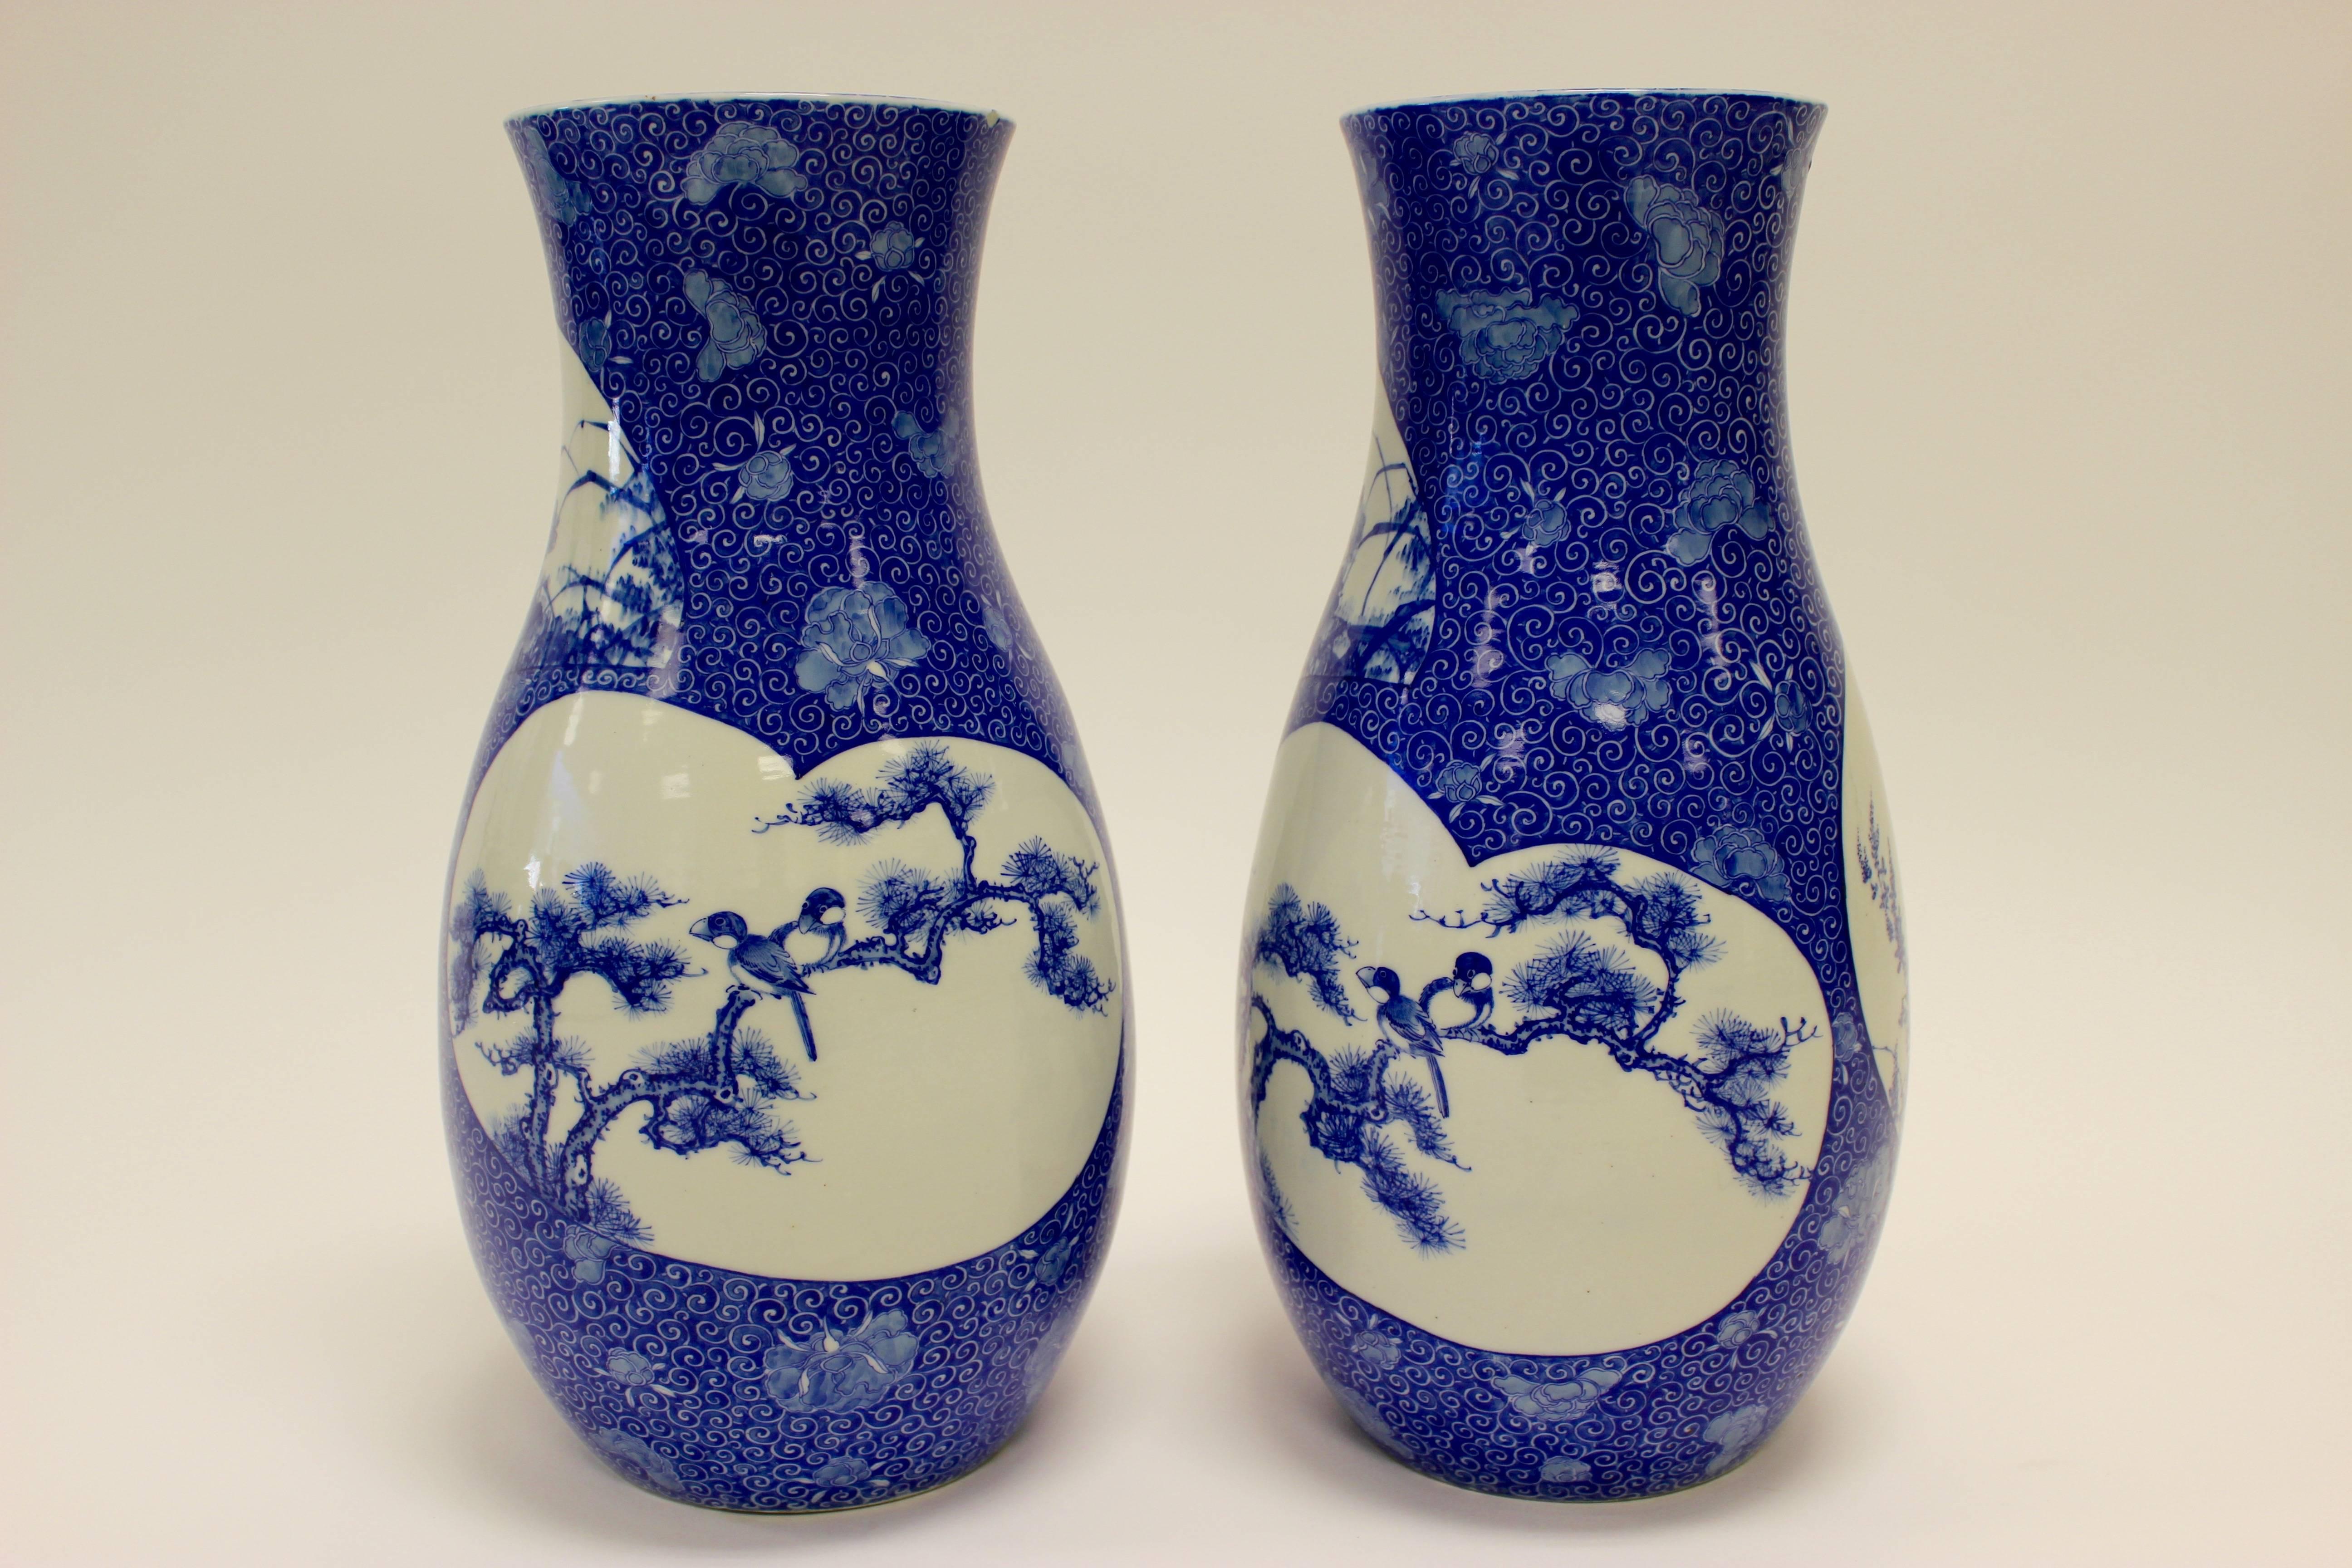 A pair of Japanese underglaze blue and white porcelain baluster vases from the late 19th century painted with shaped panels of flowers, insects and birds. Formerly in the Kentshire collection, each piece features a round panel with a fly on a prunus